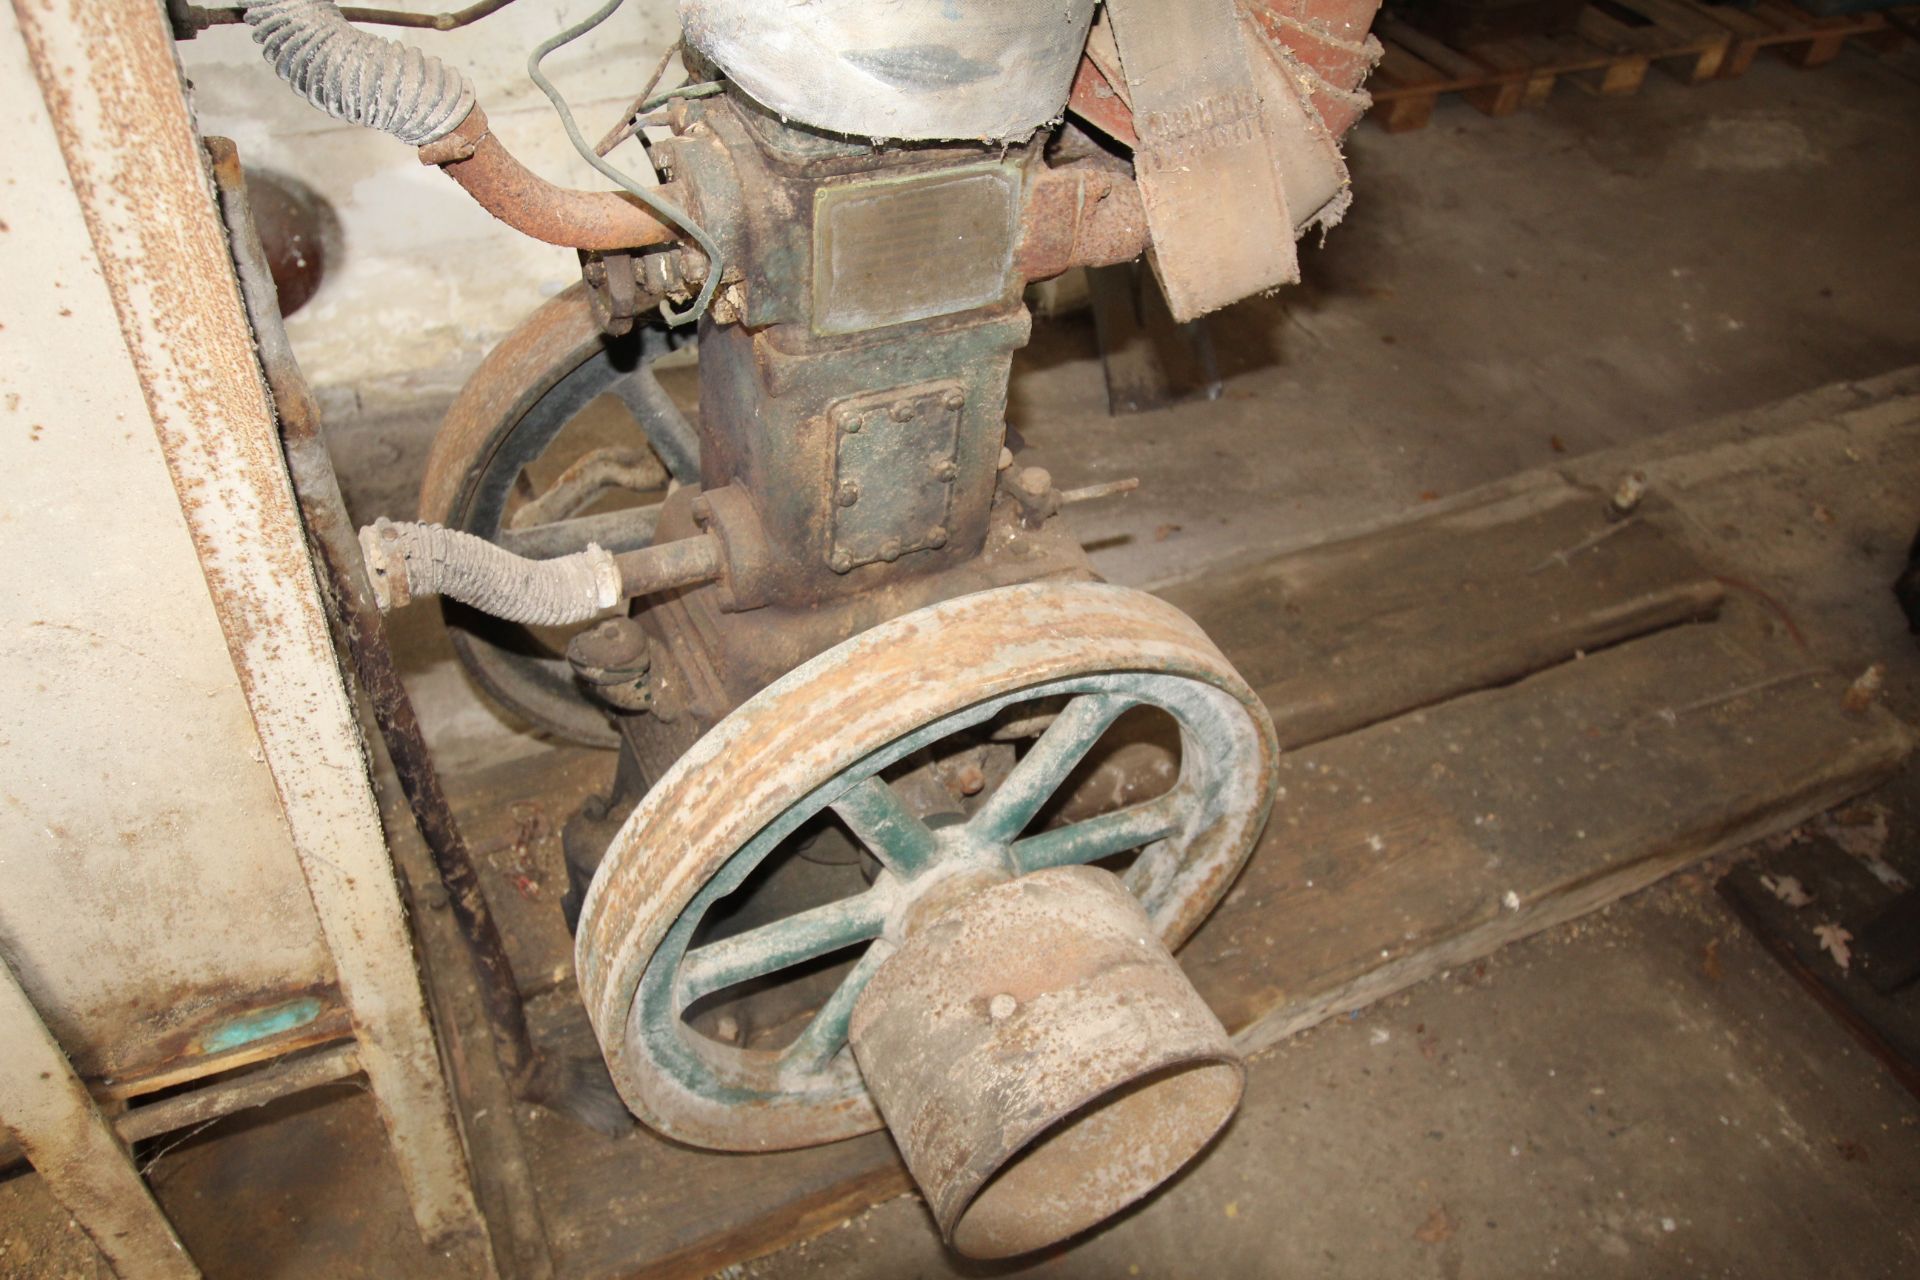 R A Lister & Co stationary engine. Owned from new. To be sold in situ and removed at purchaser’s - Image 2 of 7